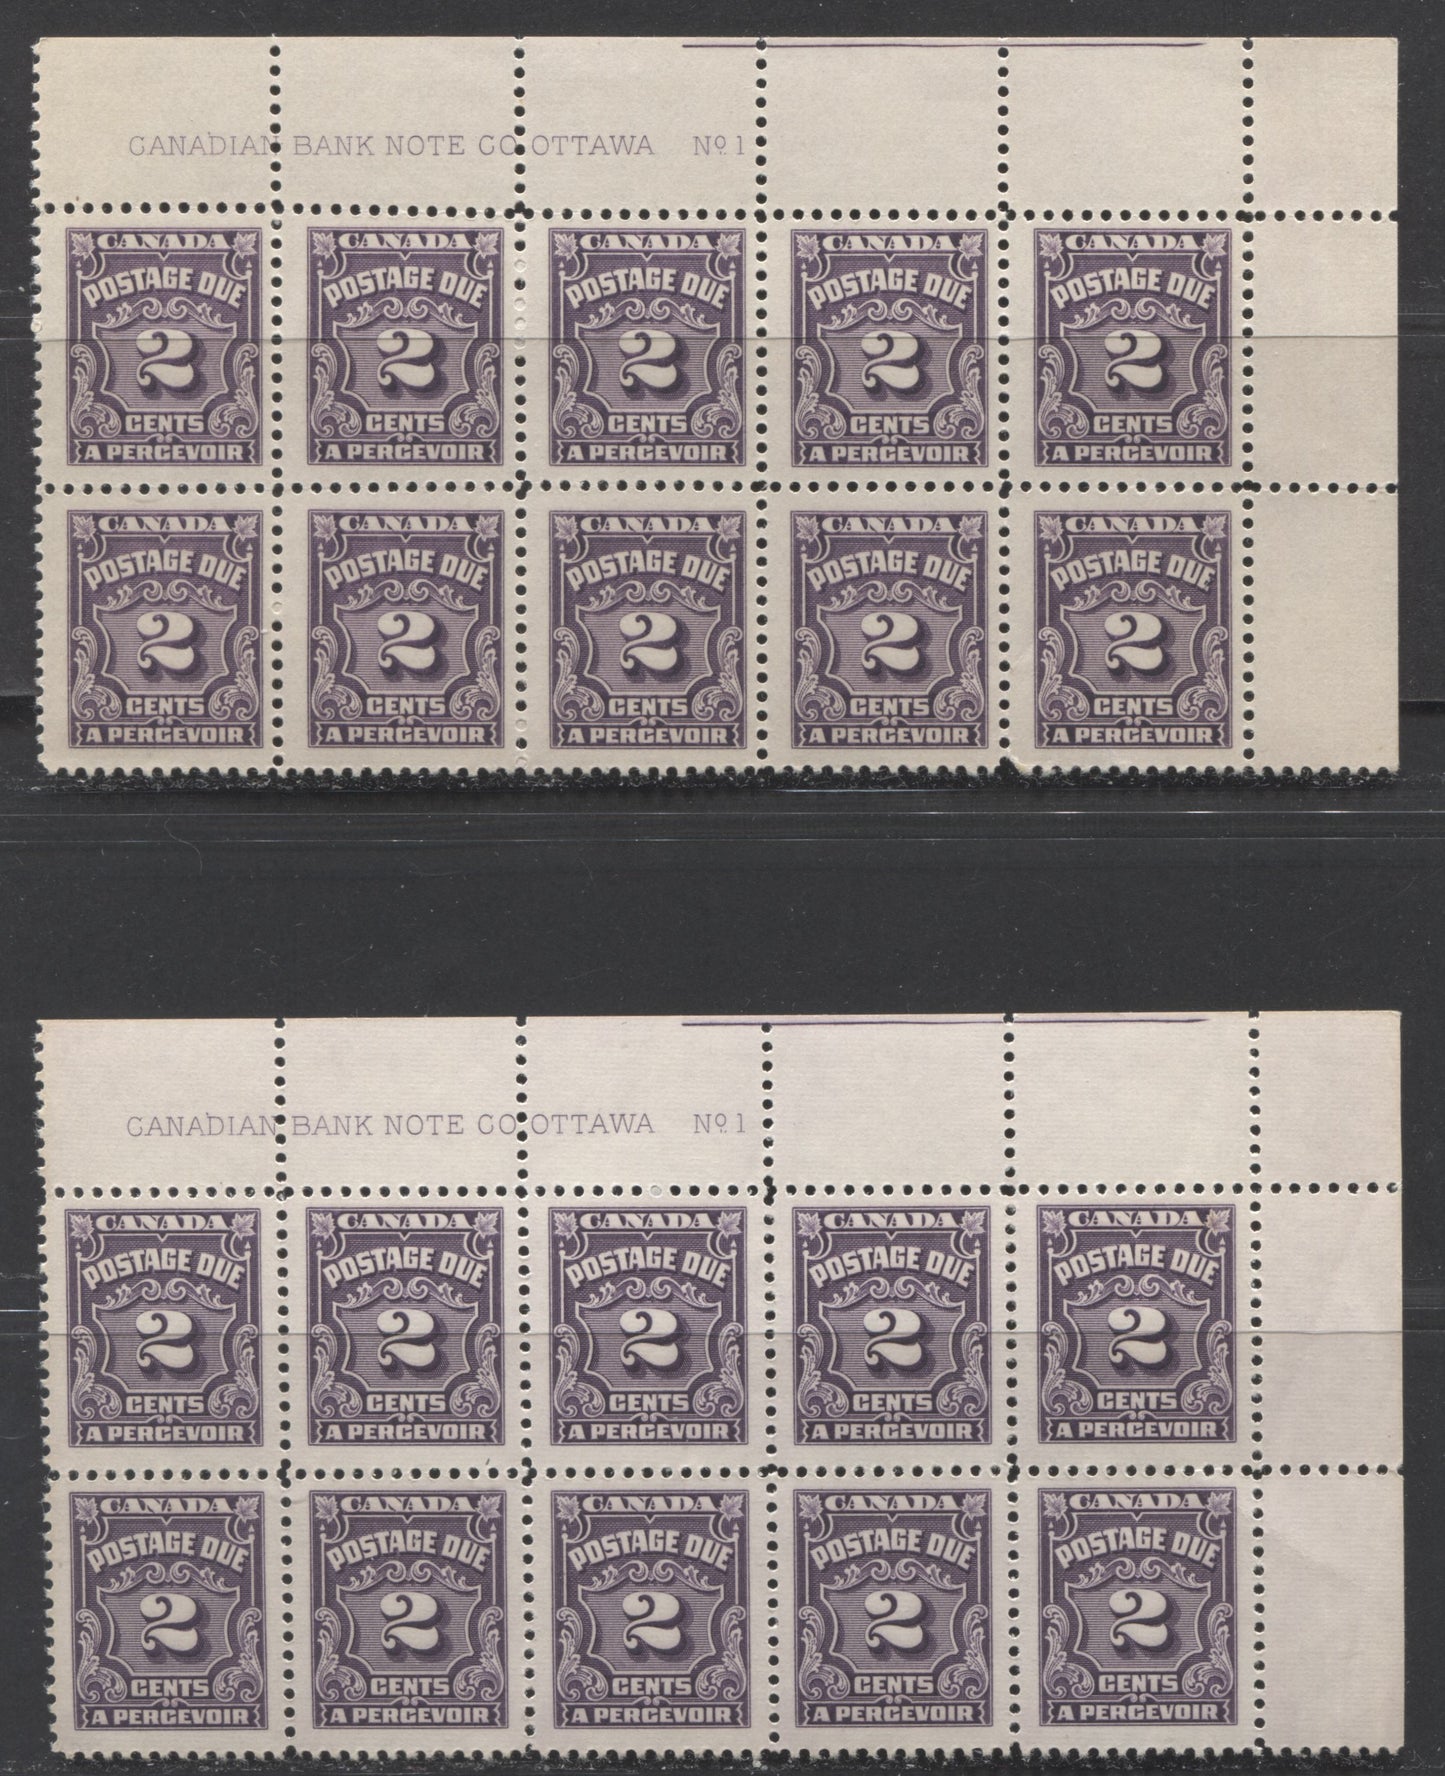 Lot 64 Canada #J16 2c Deep Violet, 1935-1965 Fourth Postage Due Issue, 2 FNH UR Plate 1 Blocks Of 10 On Vertical Wove Paper (Clear Mesh) & Deep Cream Gum And Horizontal Ribbed Paper With Smooth Cream Gum